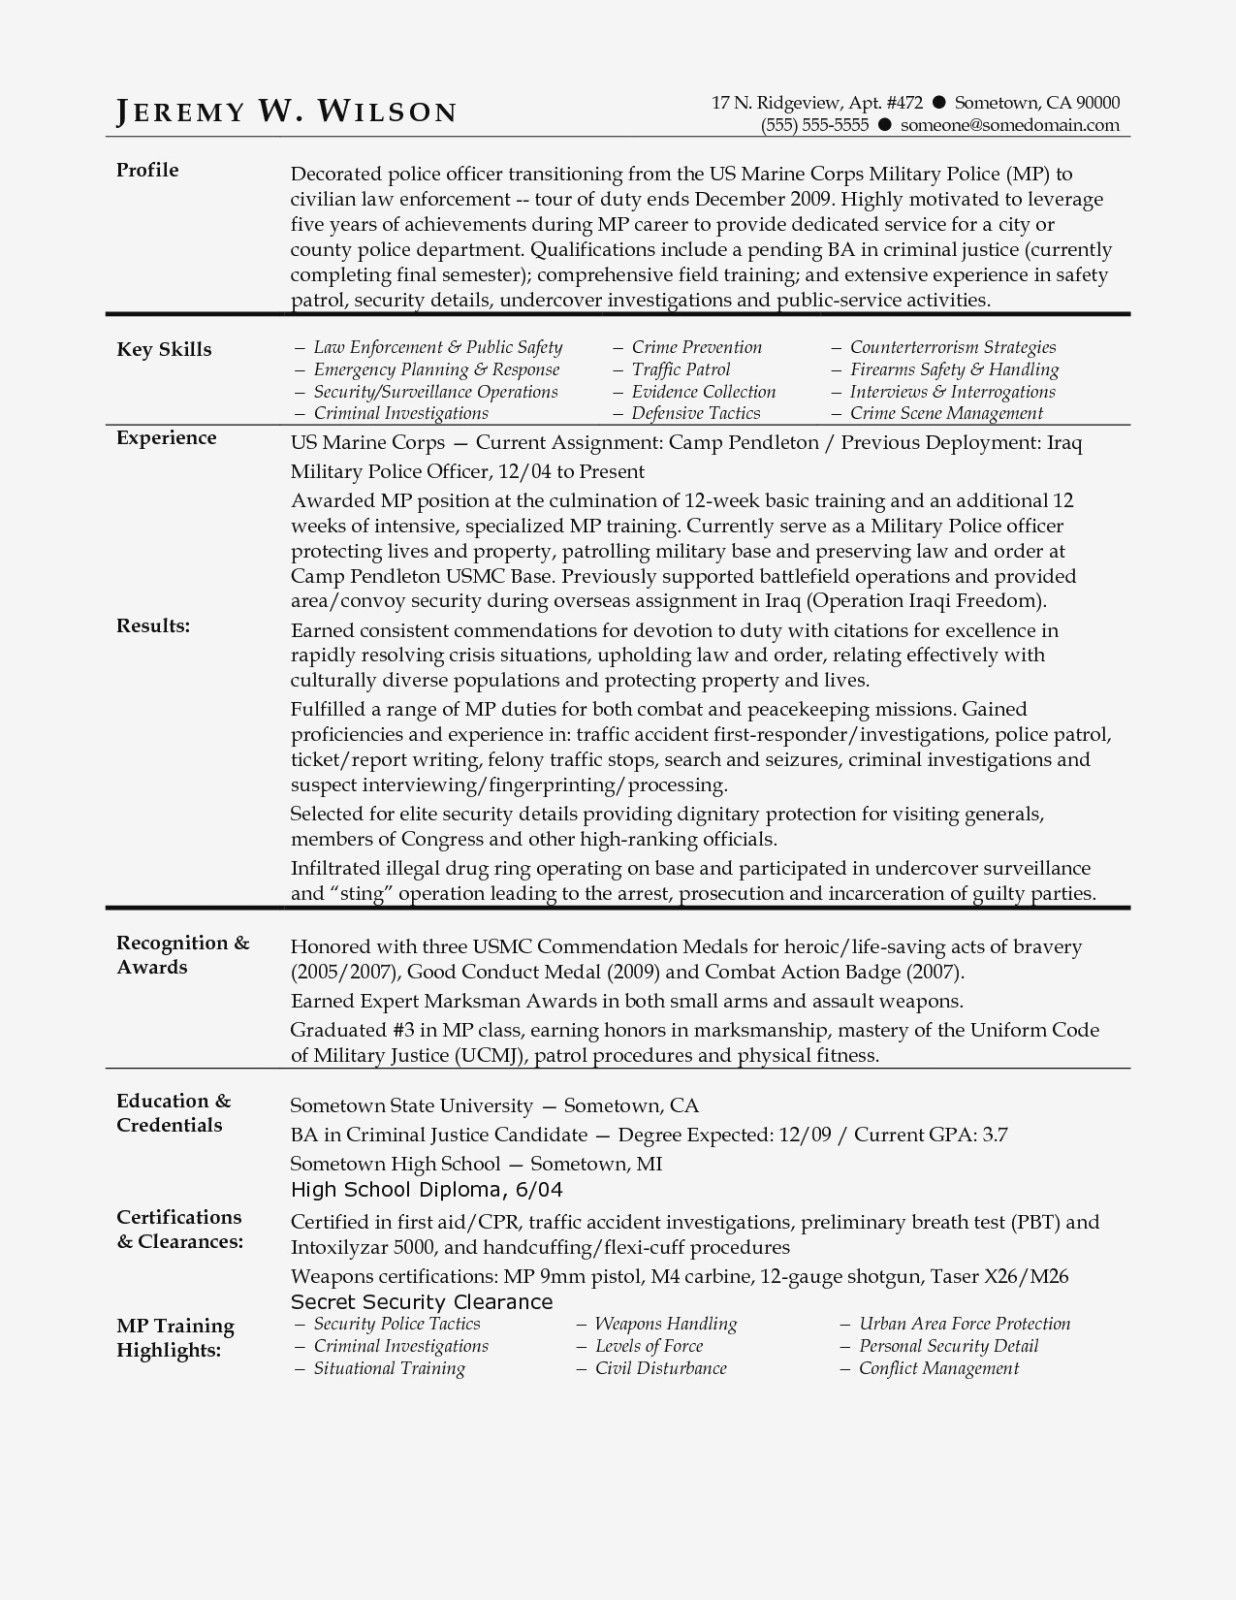 Sample Resume for Police Officer with No Experience Police Officer Resume Templates, Police Officer Resume Templates …